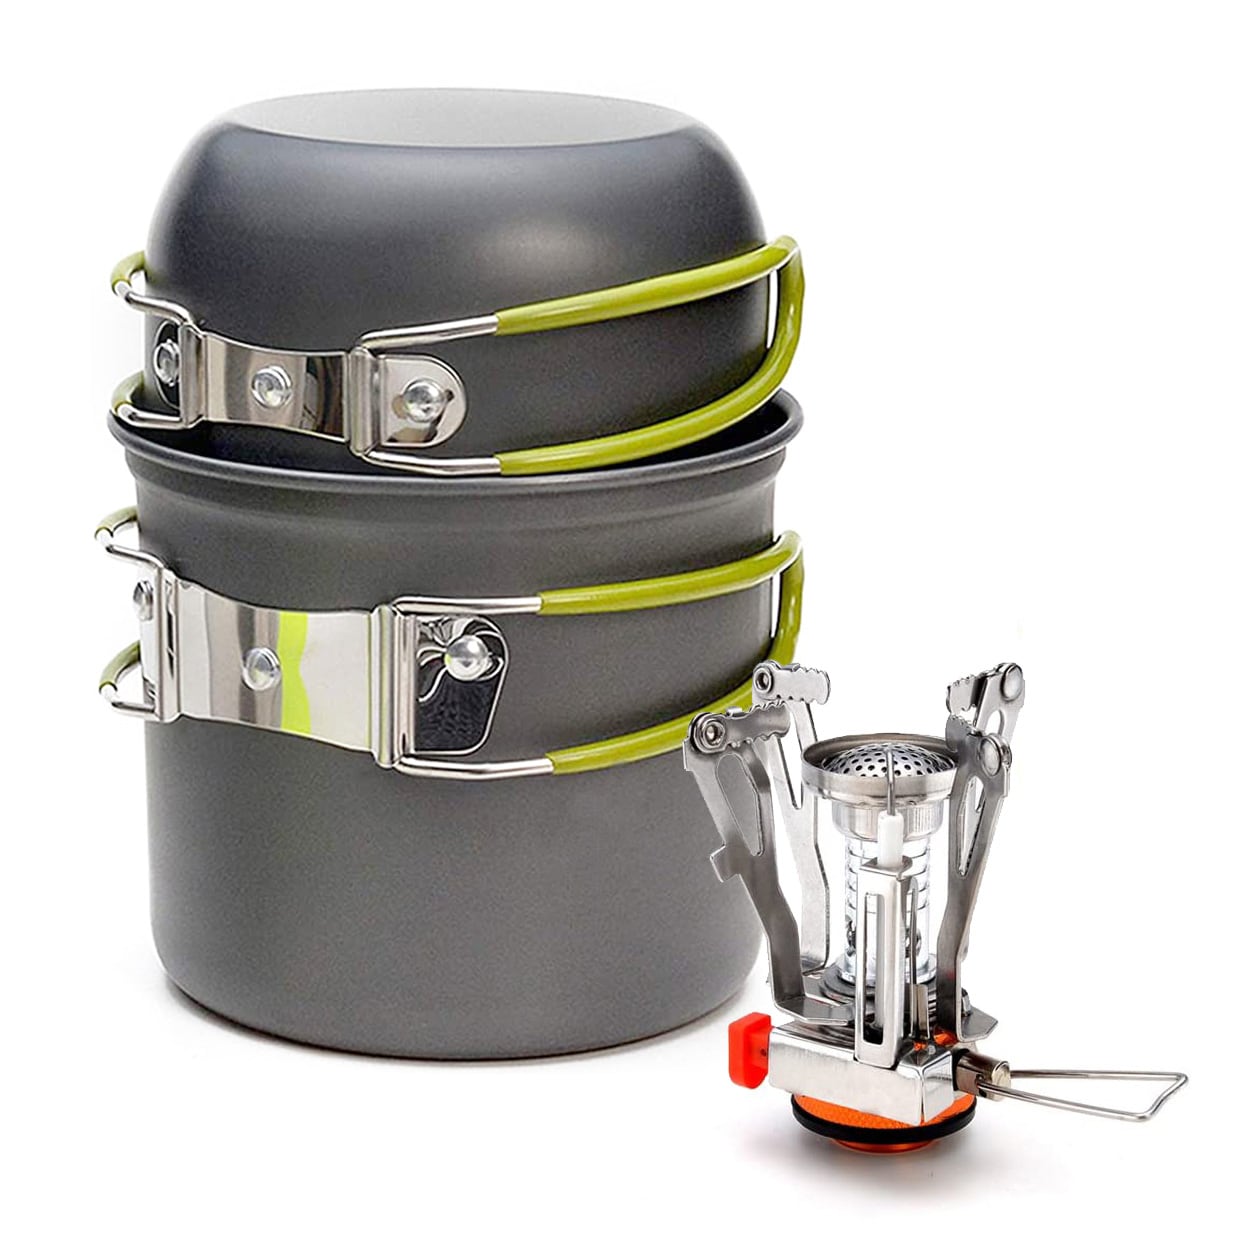 Outdoor Portable Stainless Steel Cooker Cooking Camping Travel Cookware Pot Set 